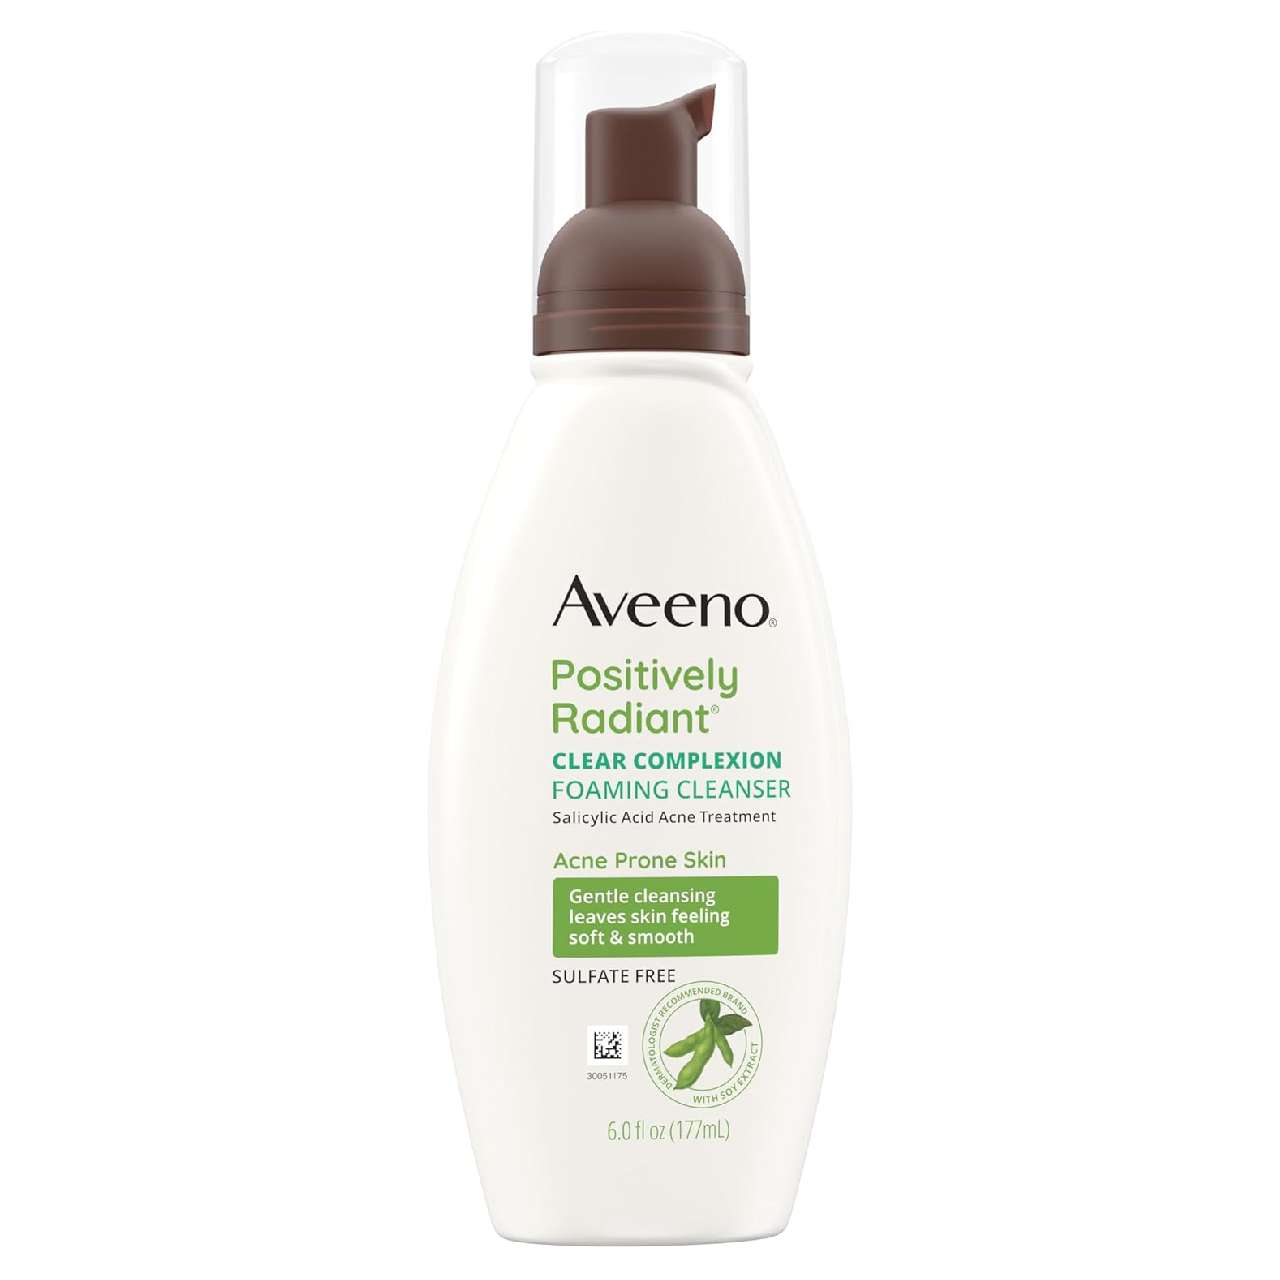 Bottle of Aveeno Clear Complexion Foaming Cleanser standing on a white background